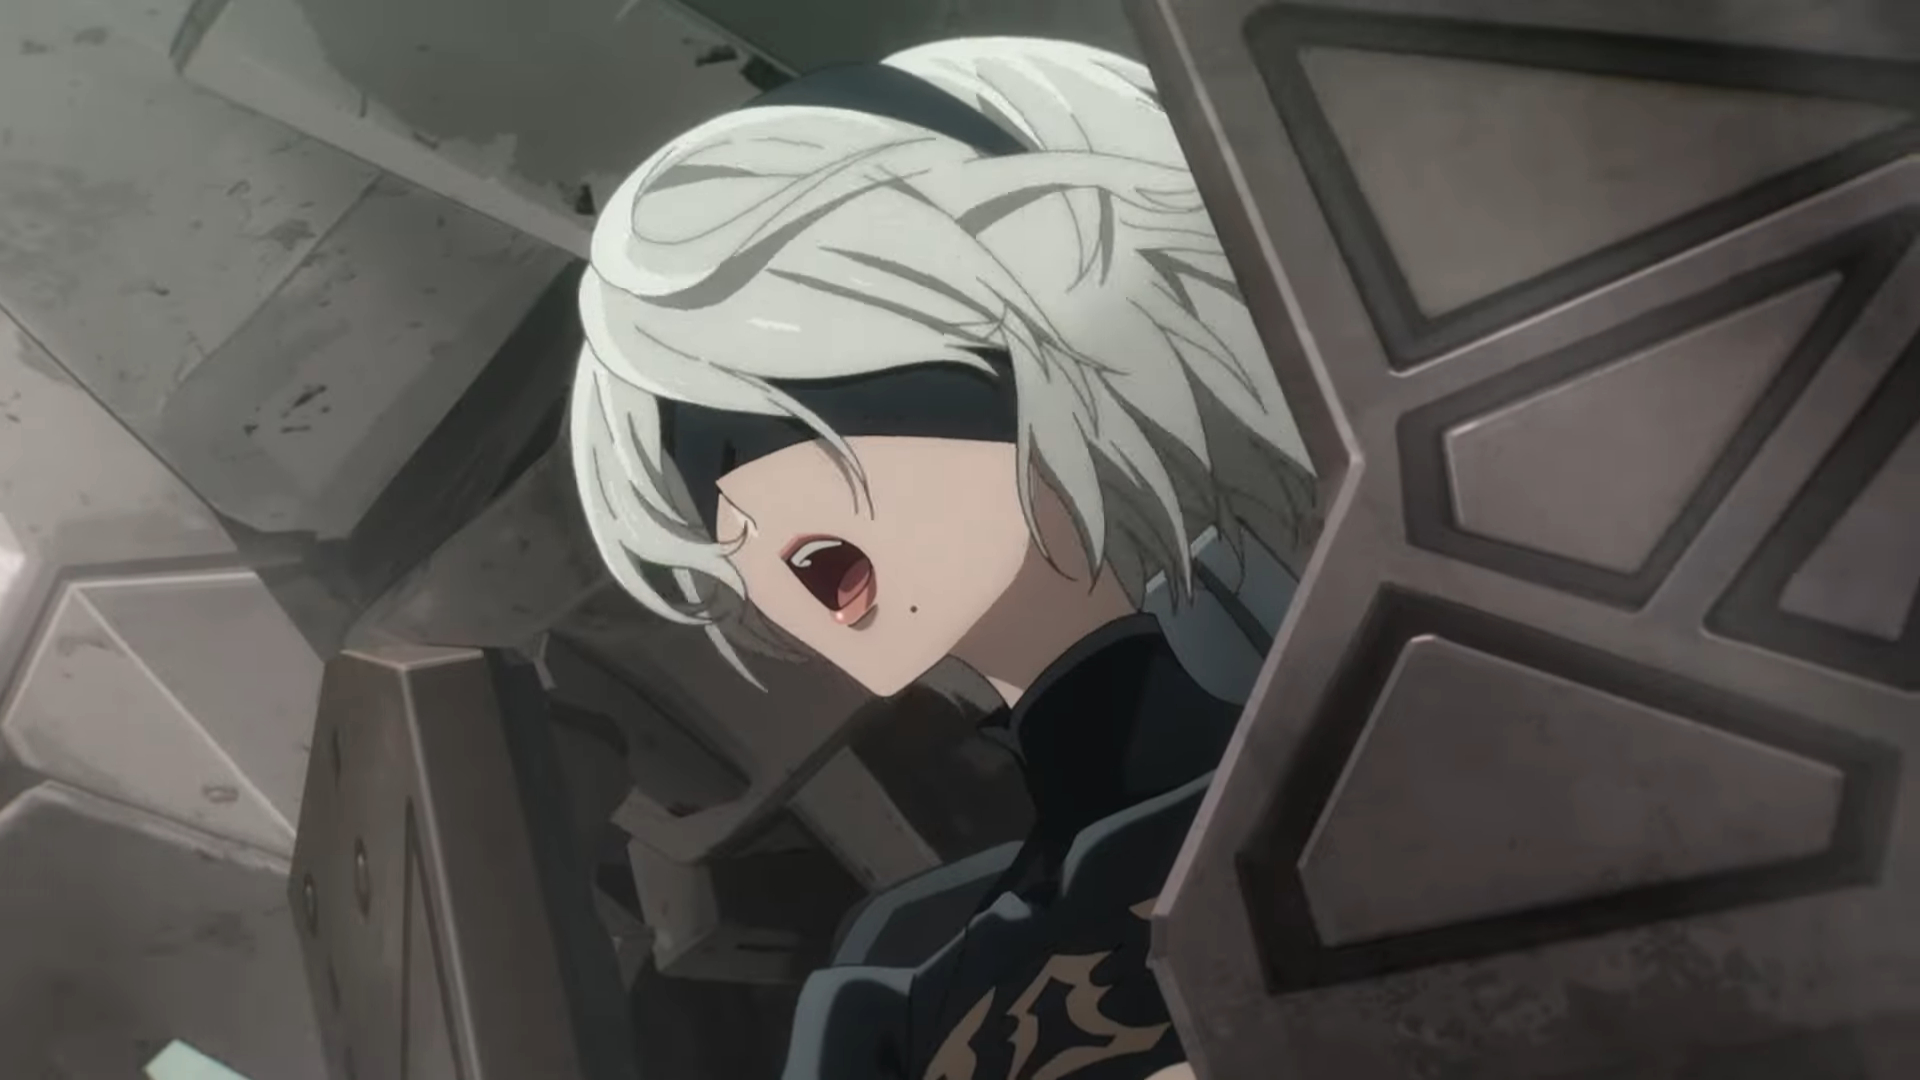 Nier Automata Ver 1.1a anime series will premiere in January 2023